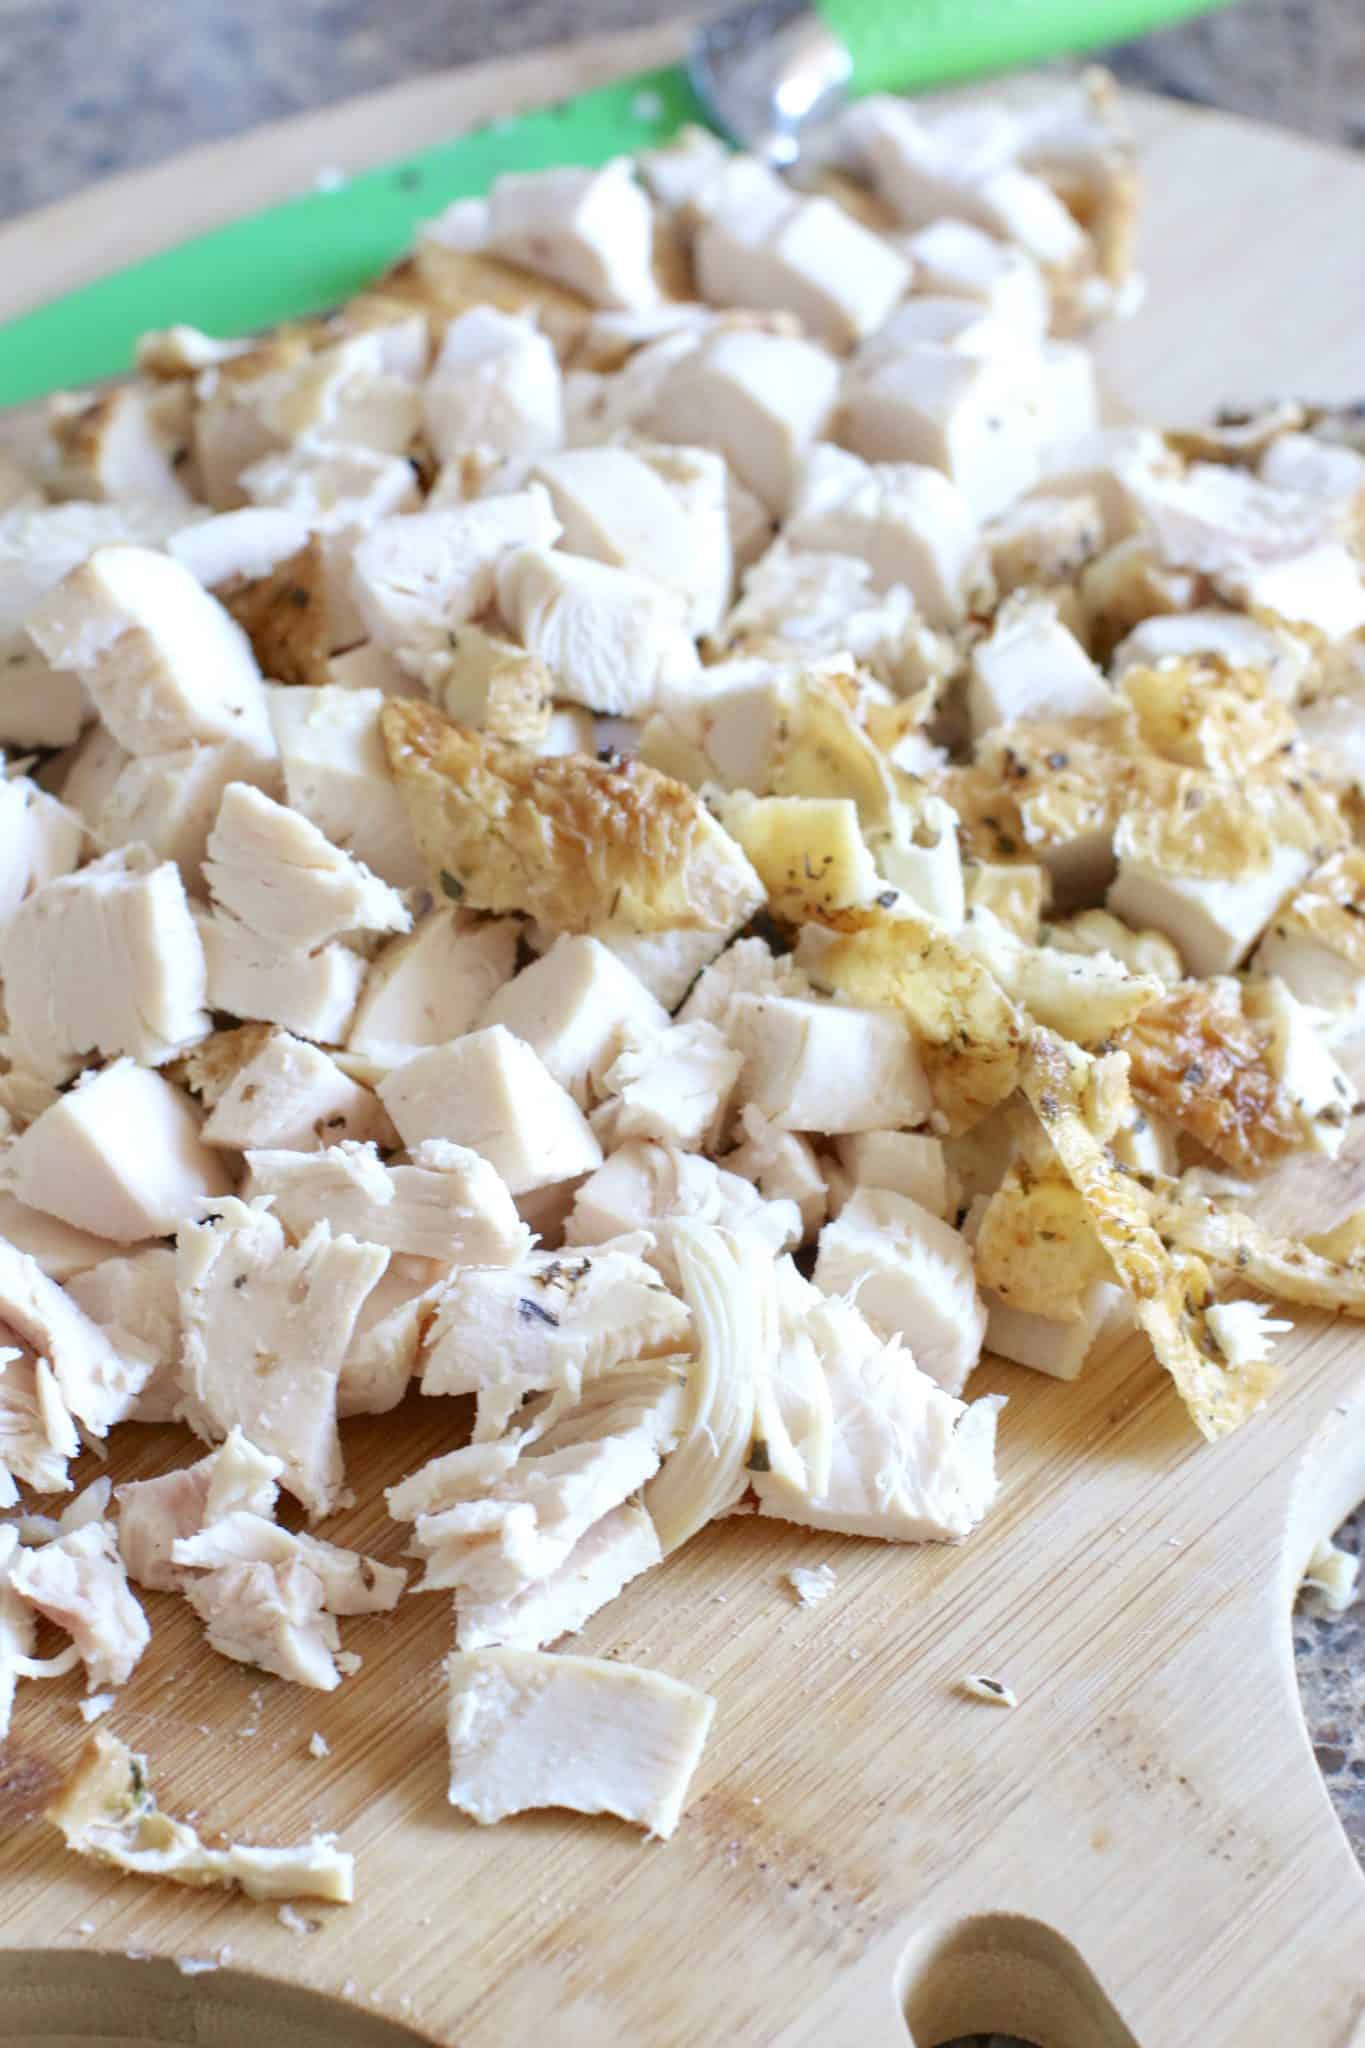 diced rotisserie chicken shown on a wooden cutting board. 